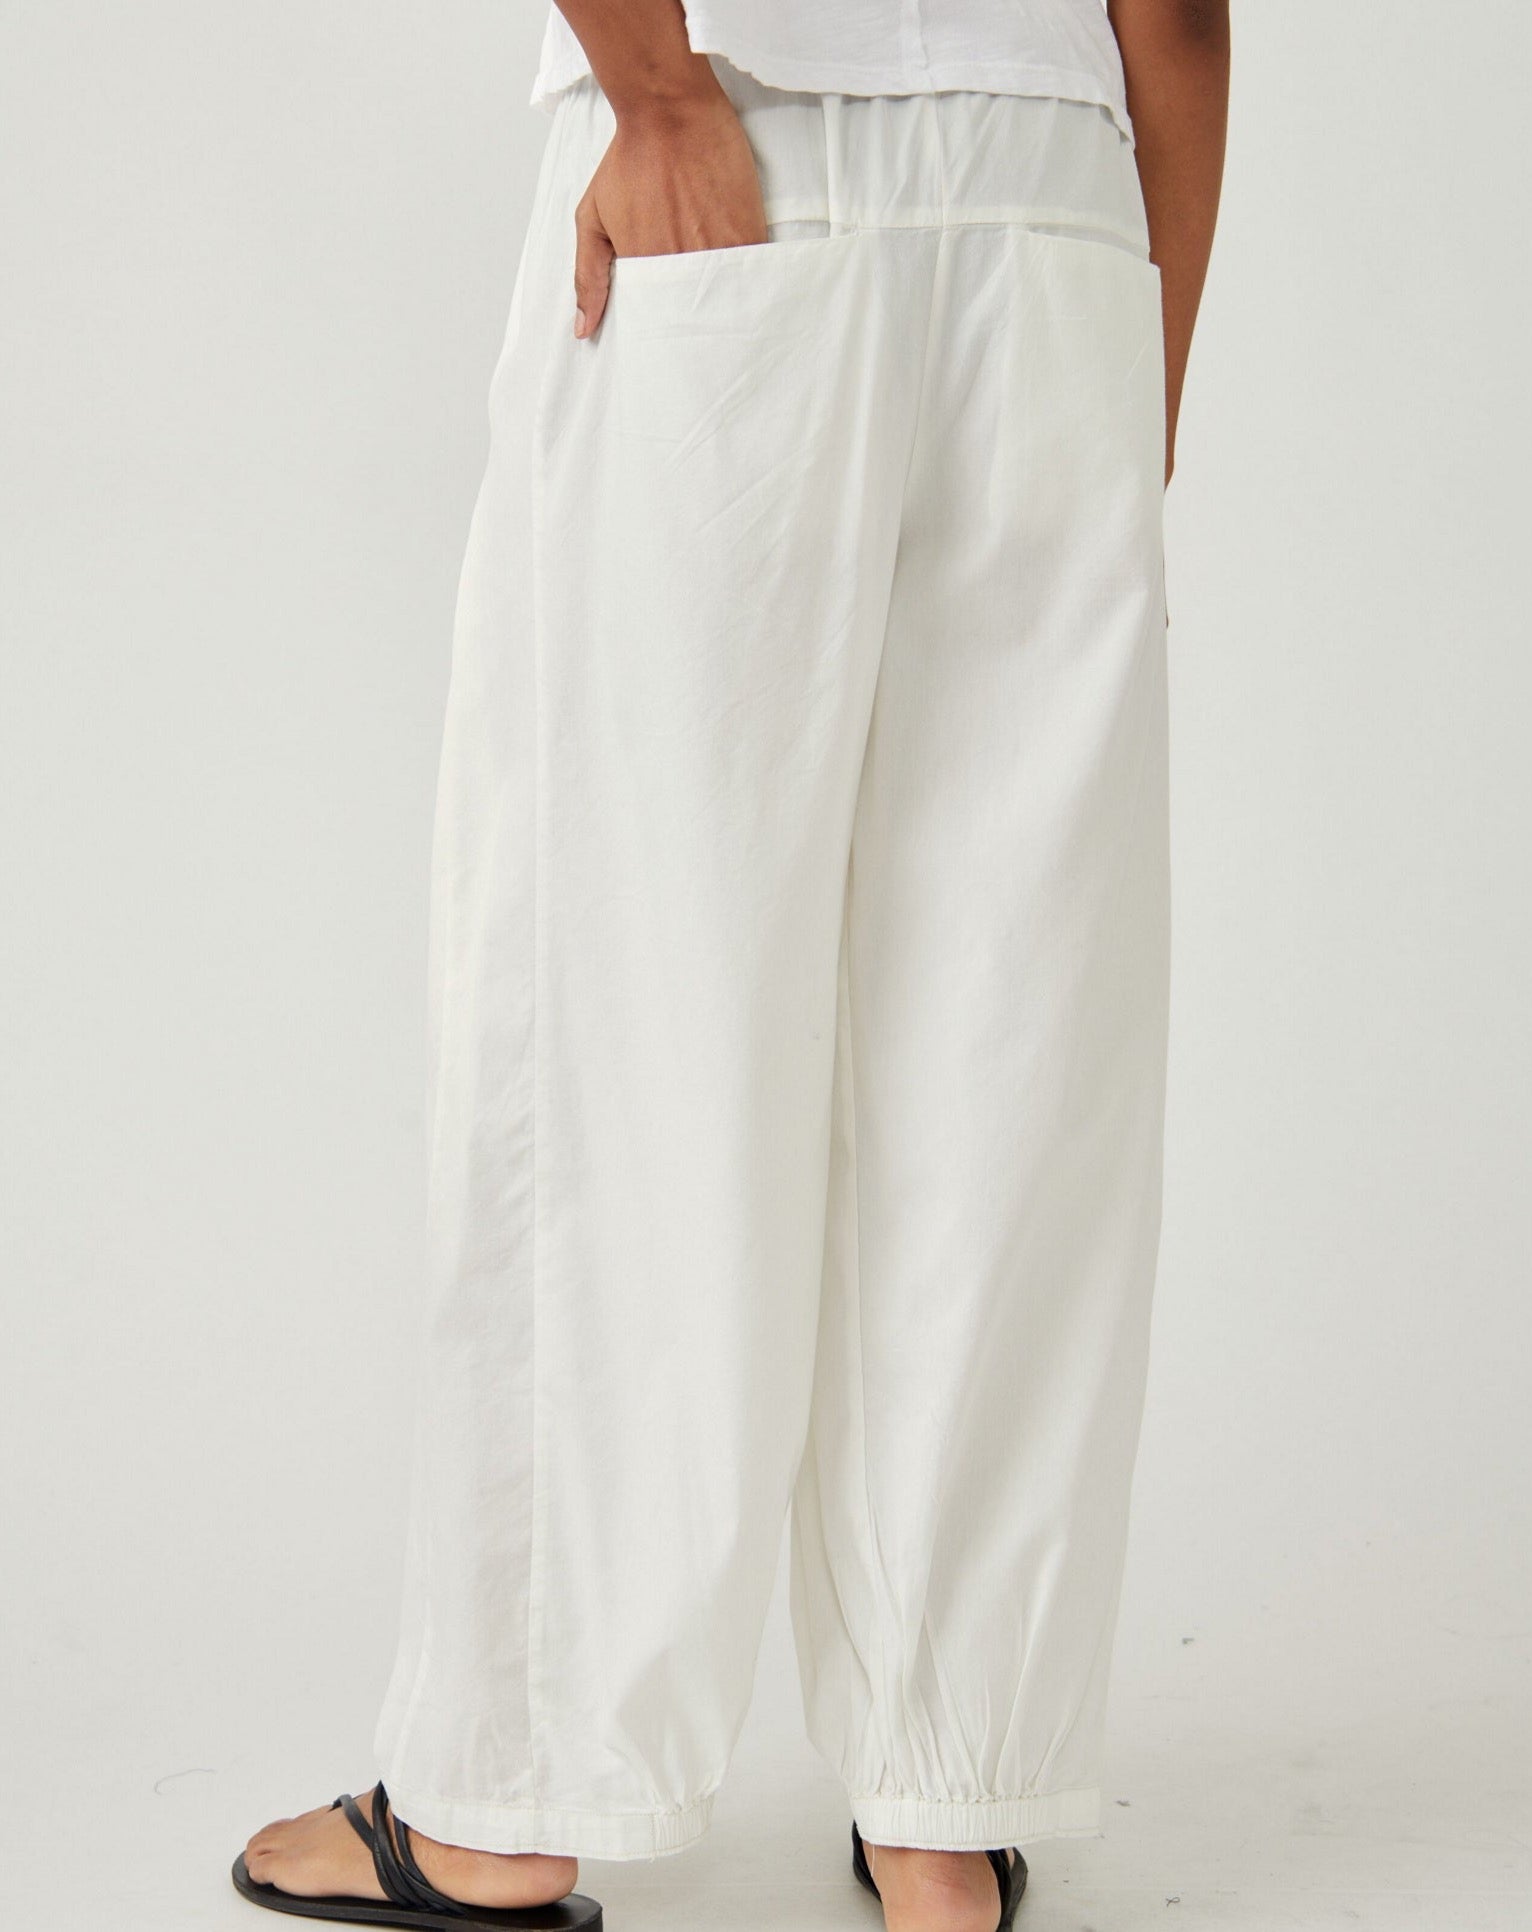 To The Sky Parachute Pant Free People